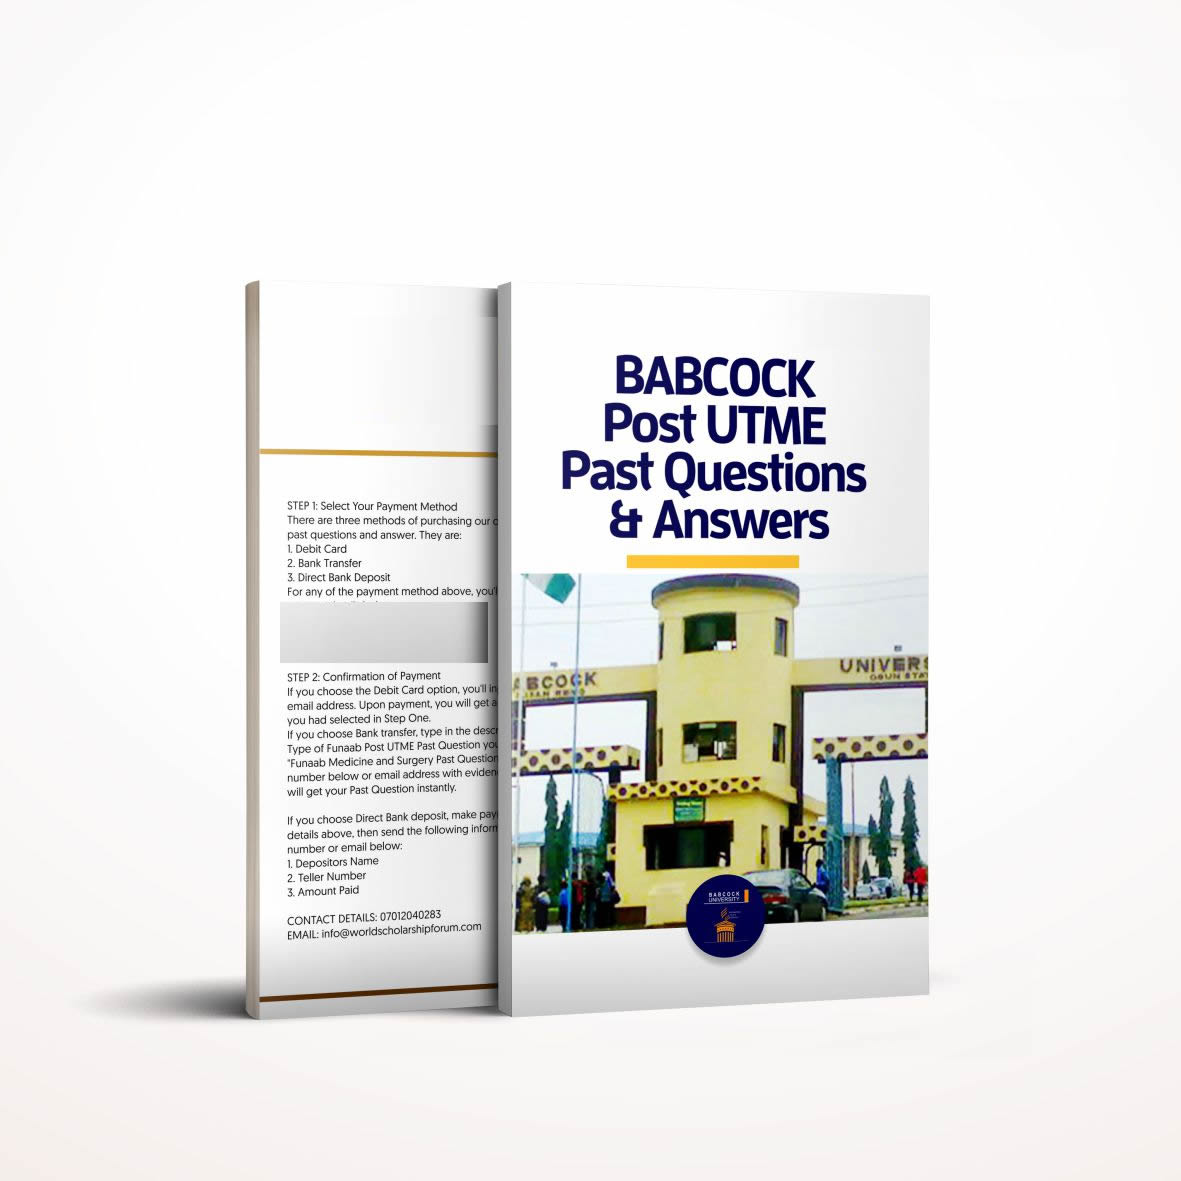 BABCOCK Uni post utme past questions and answers - Pdf